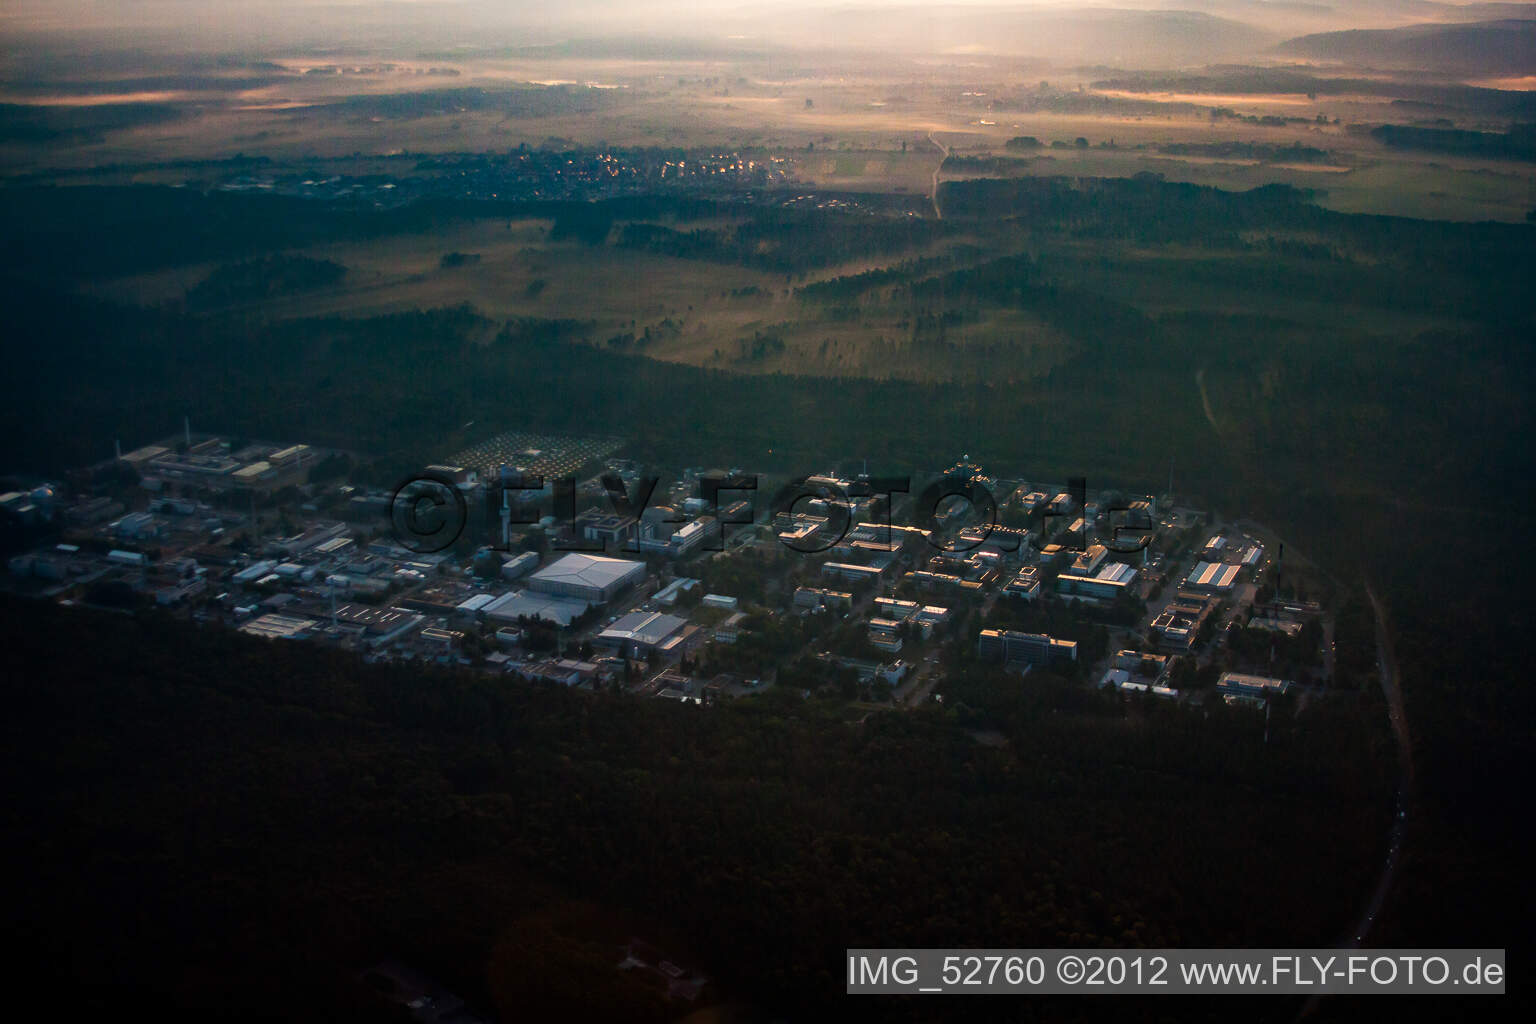 KIT North in the district Leopoldshafen in Eggenstein-Leopoldshafen in the state Baden-Wuerttemberg, Germany seen from a drone